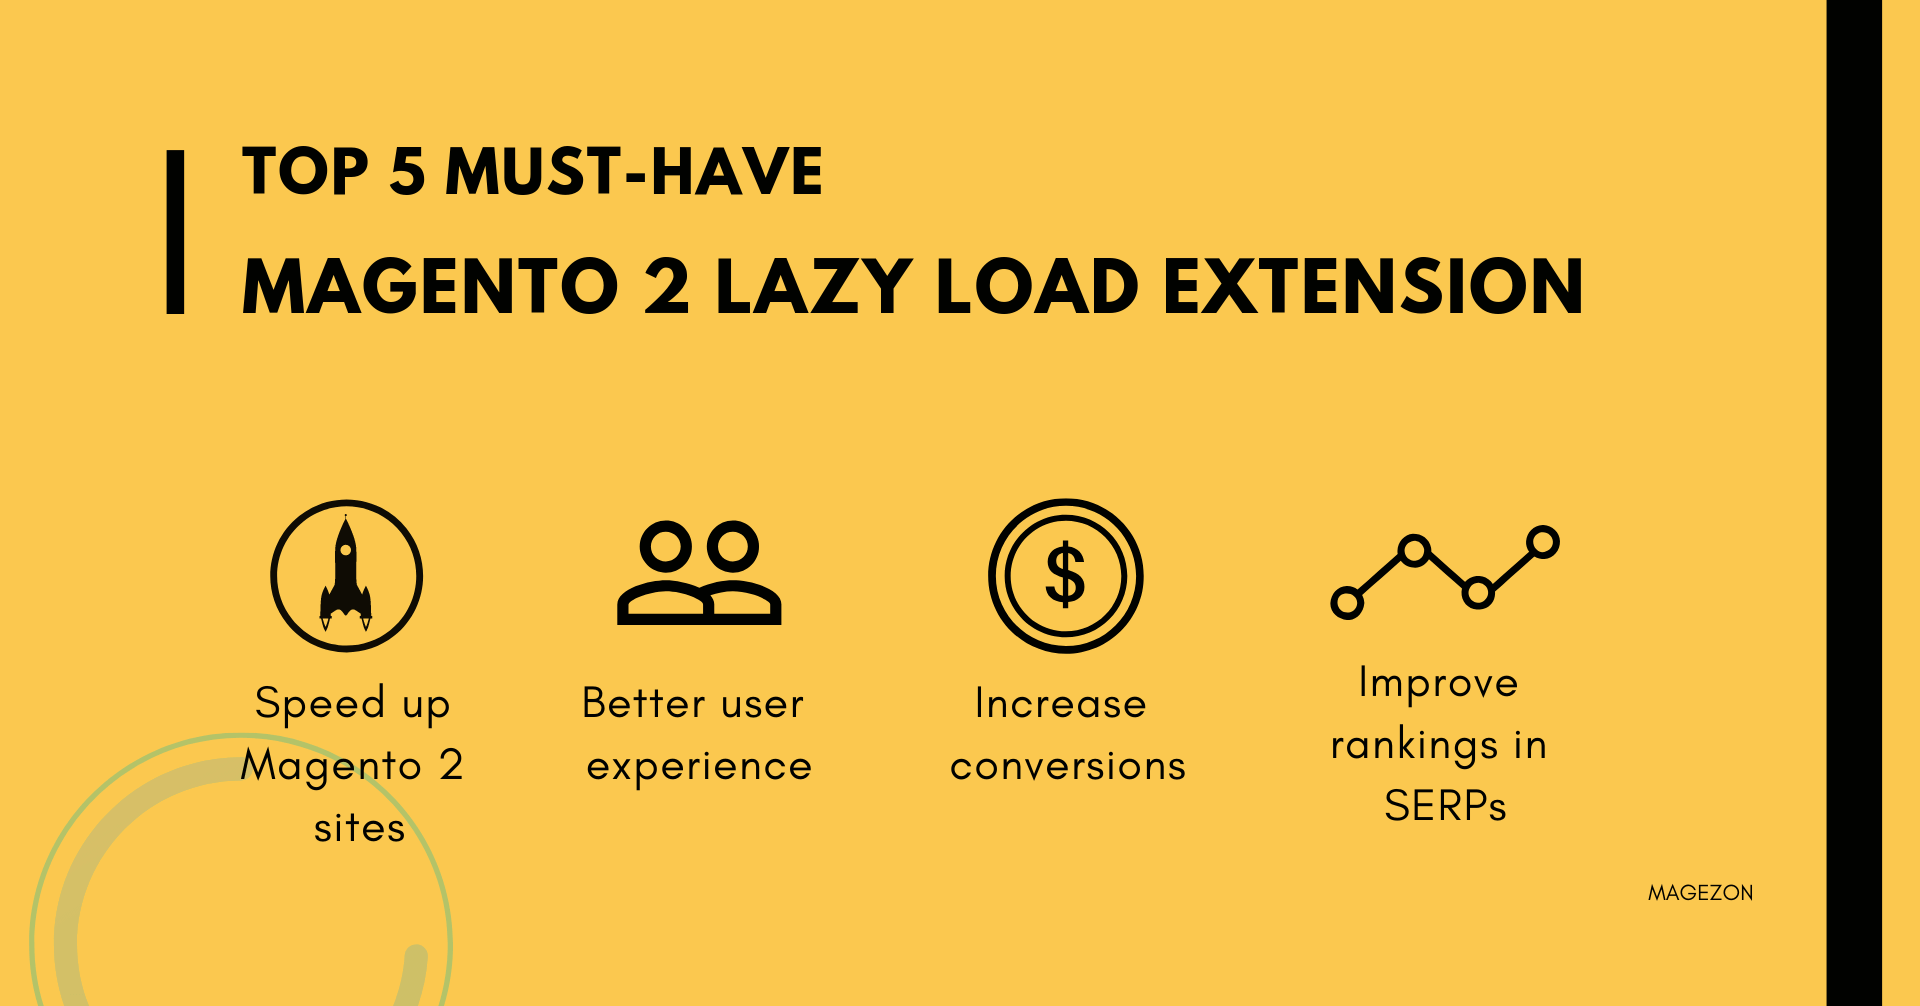 Top 5 Must-have Magento 2 Lazy Load Extension